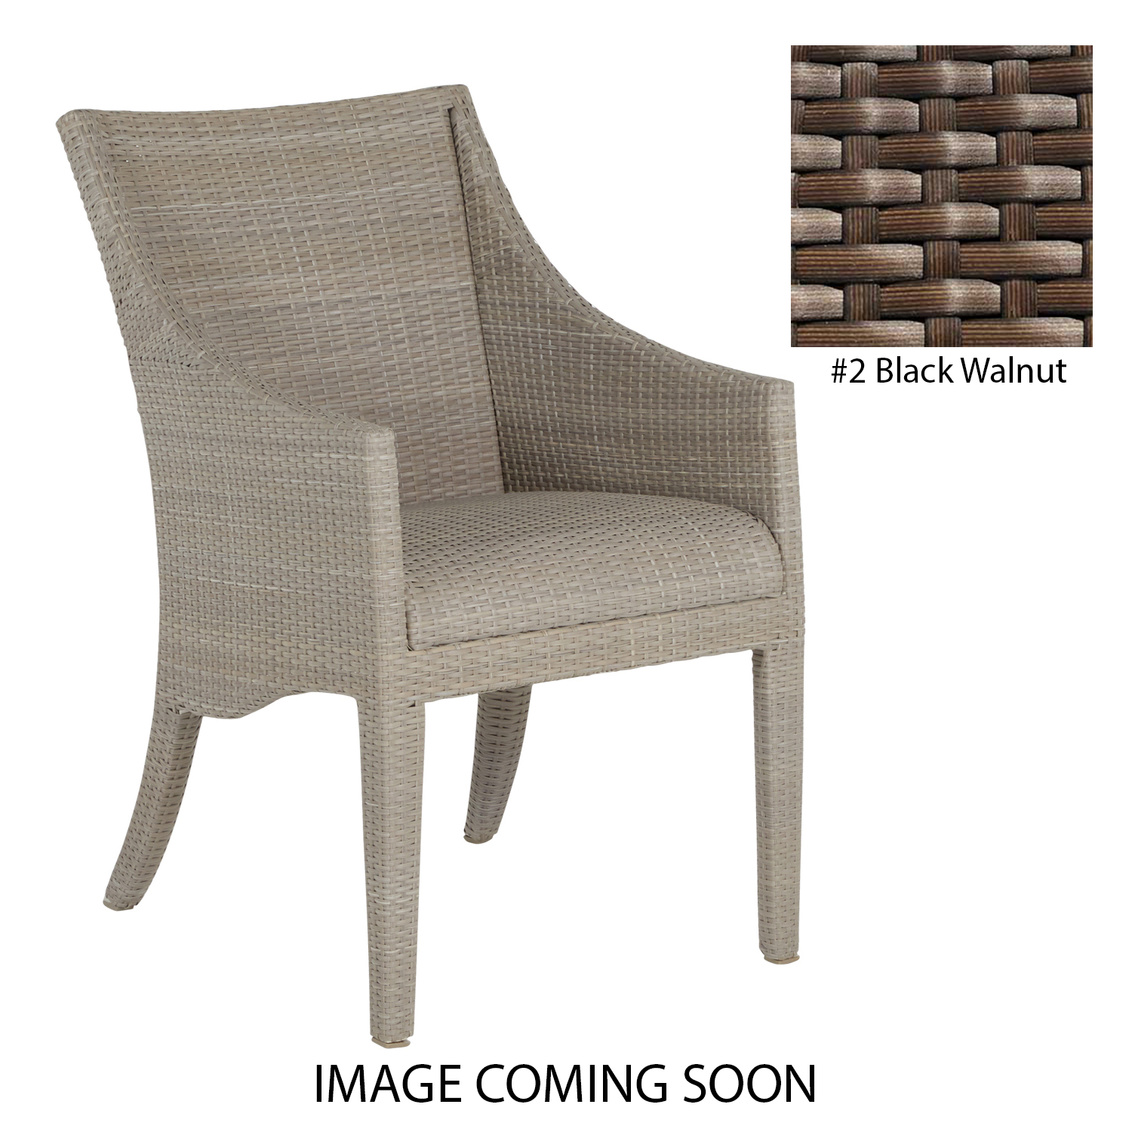 athena plus woven arm chair in black walnut product image